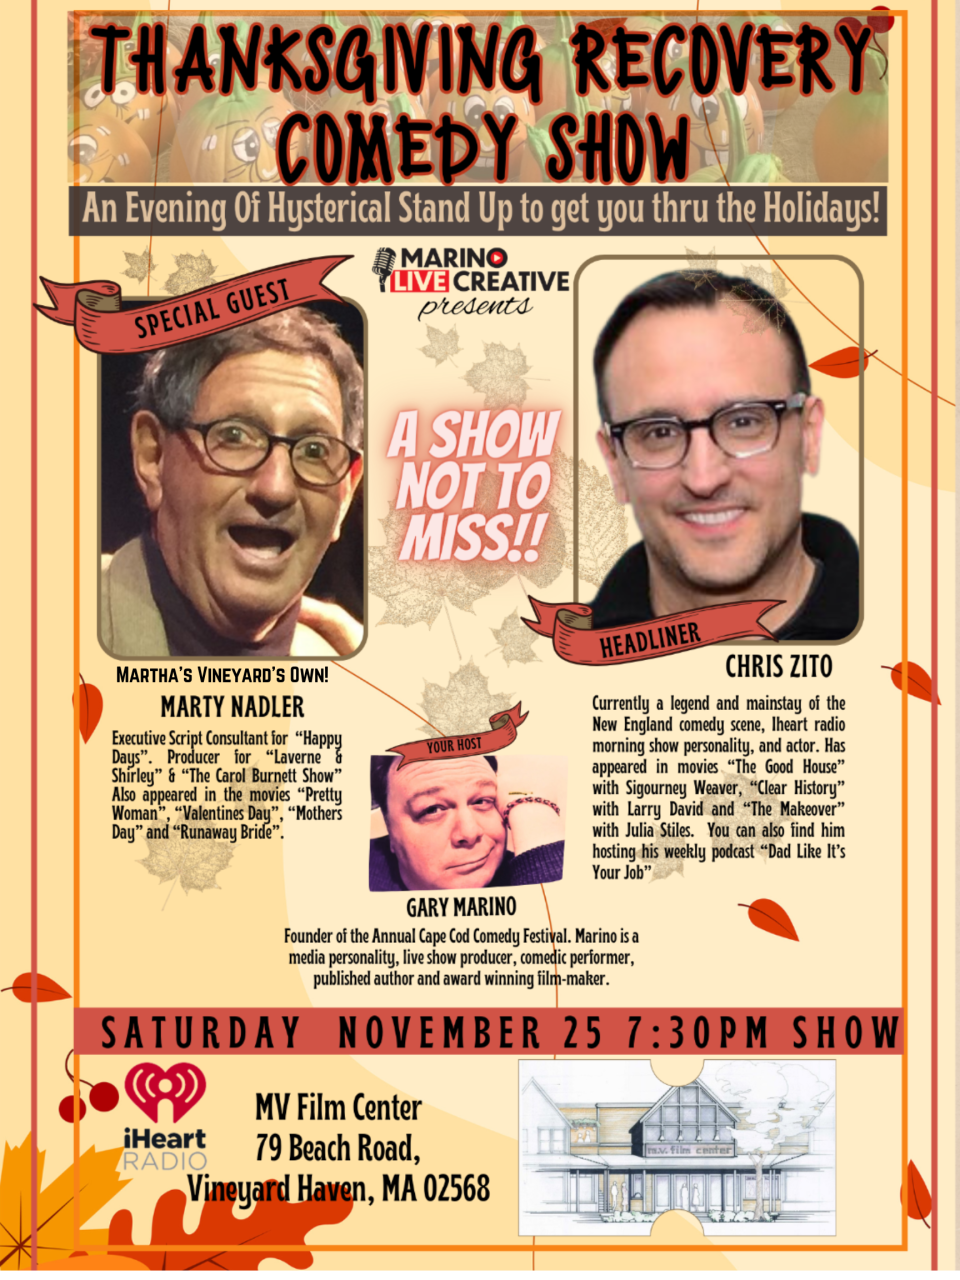 Poster for the "Thanksgiving Recovery" comedy show at the Martha's Vineyard Film Center on Nov. 25.